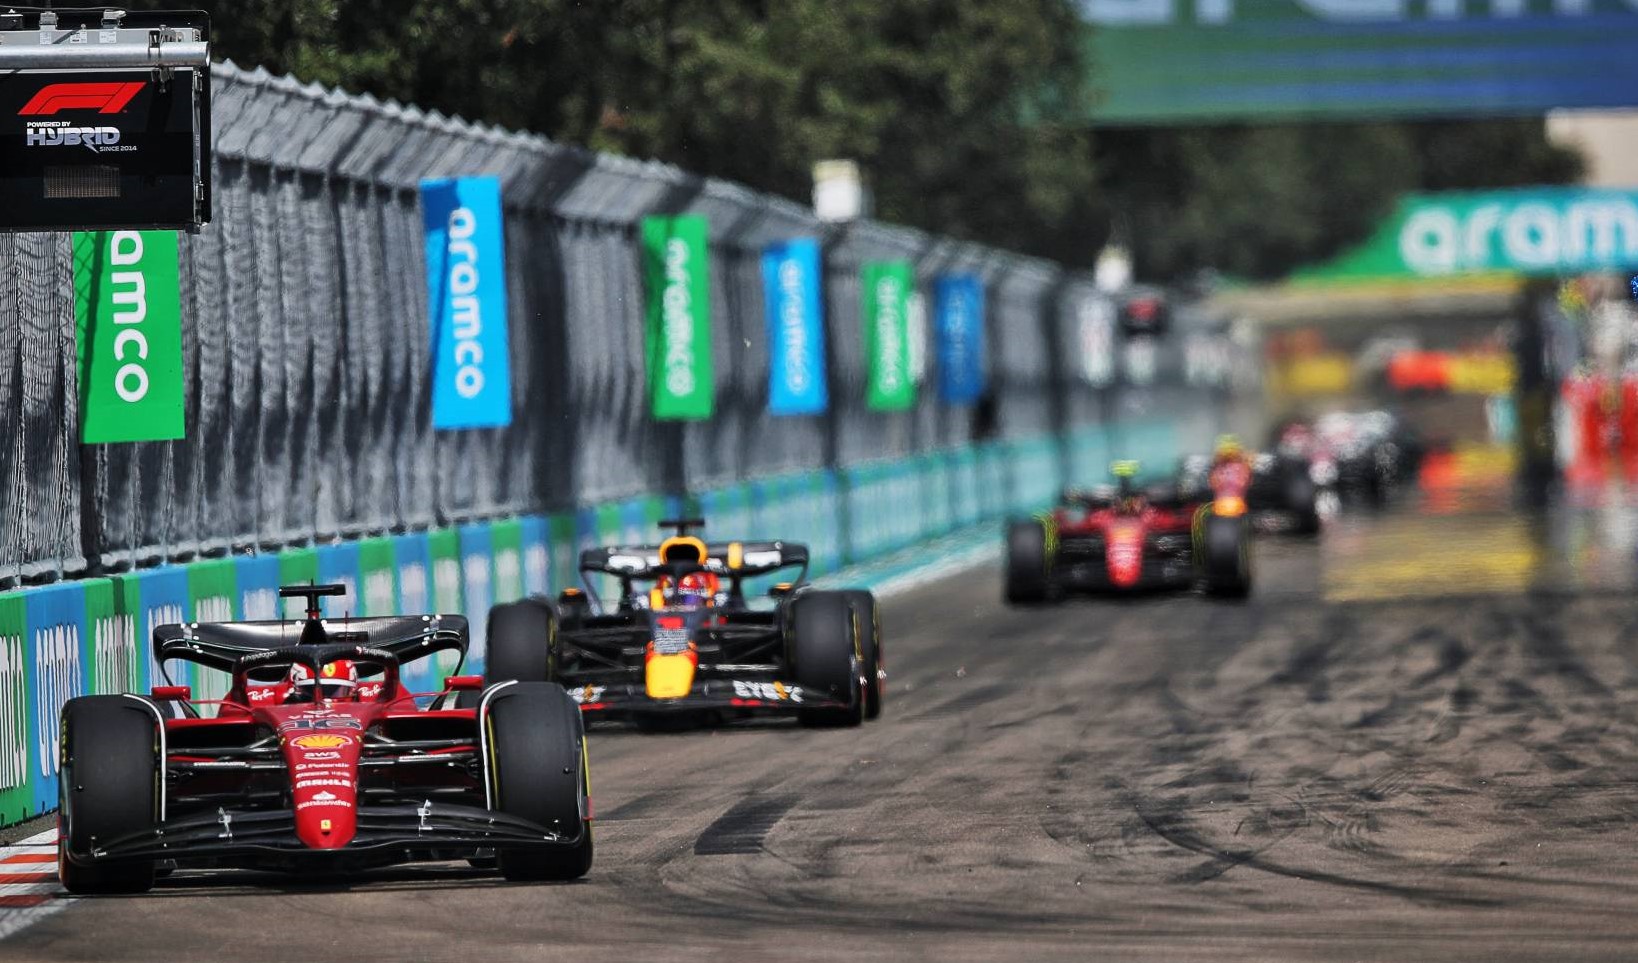 Several F1 drivers risk getting an engine penalty in the Spanish Grand Prix